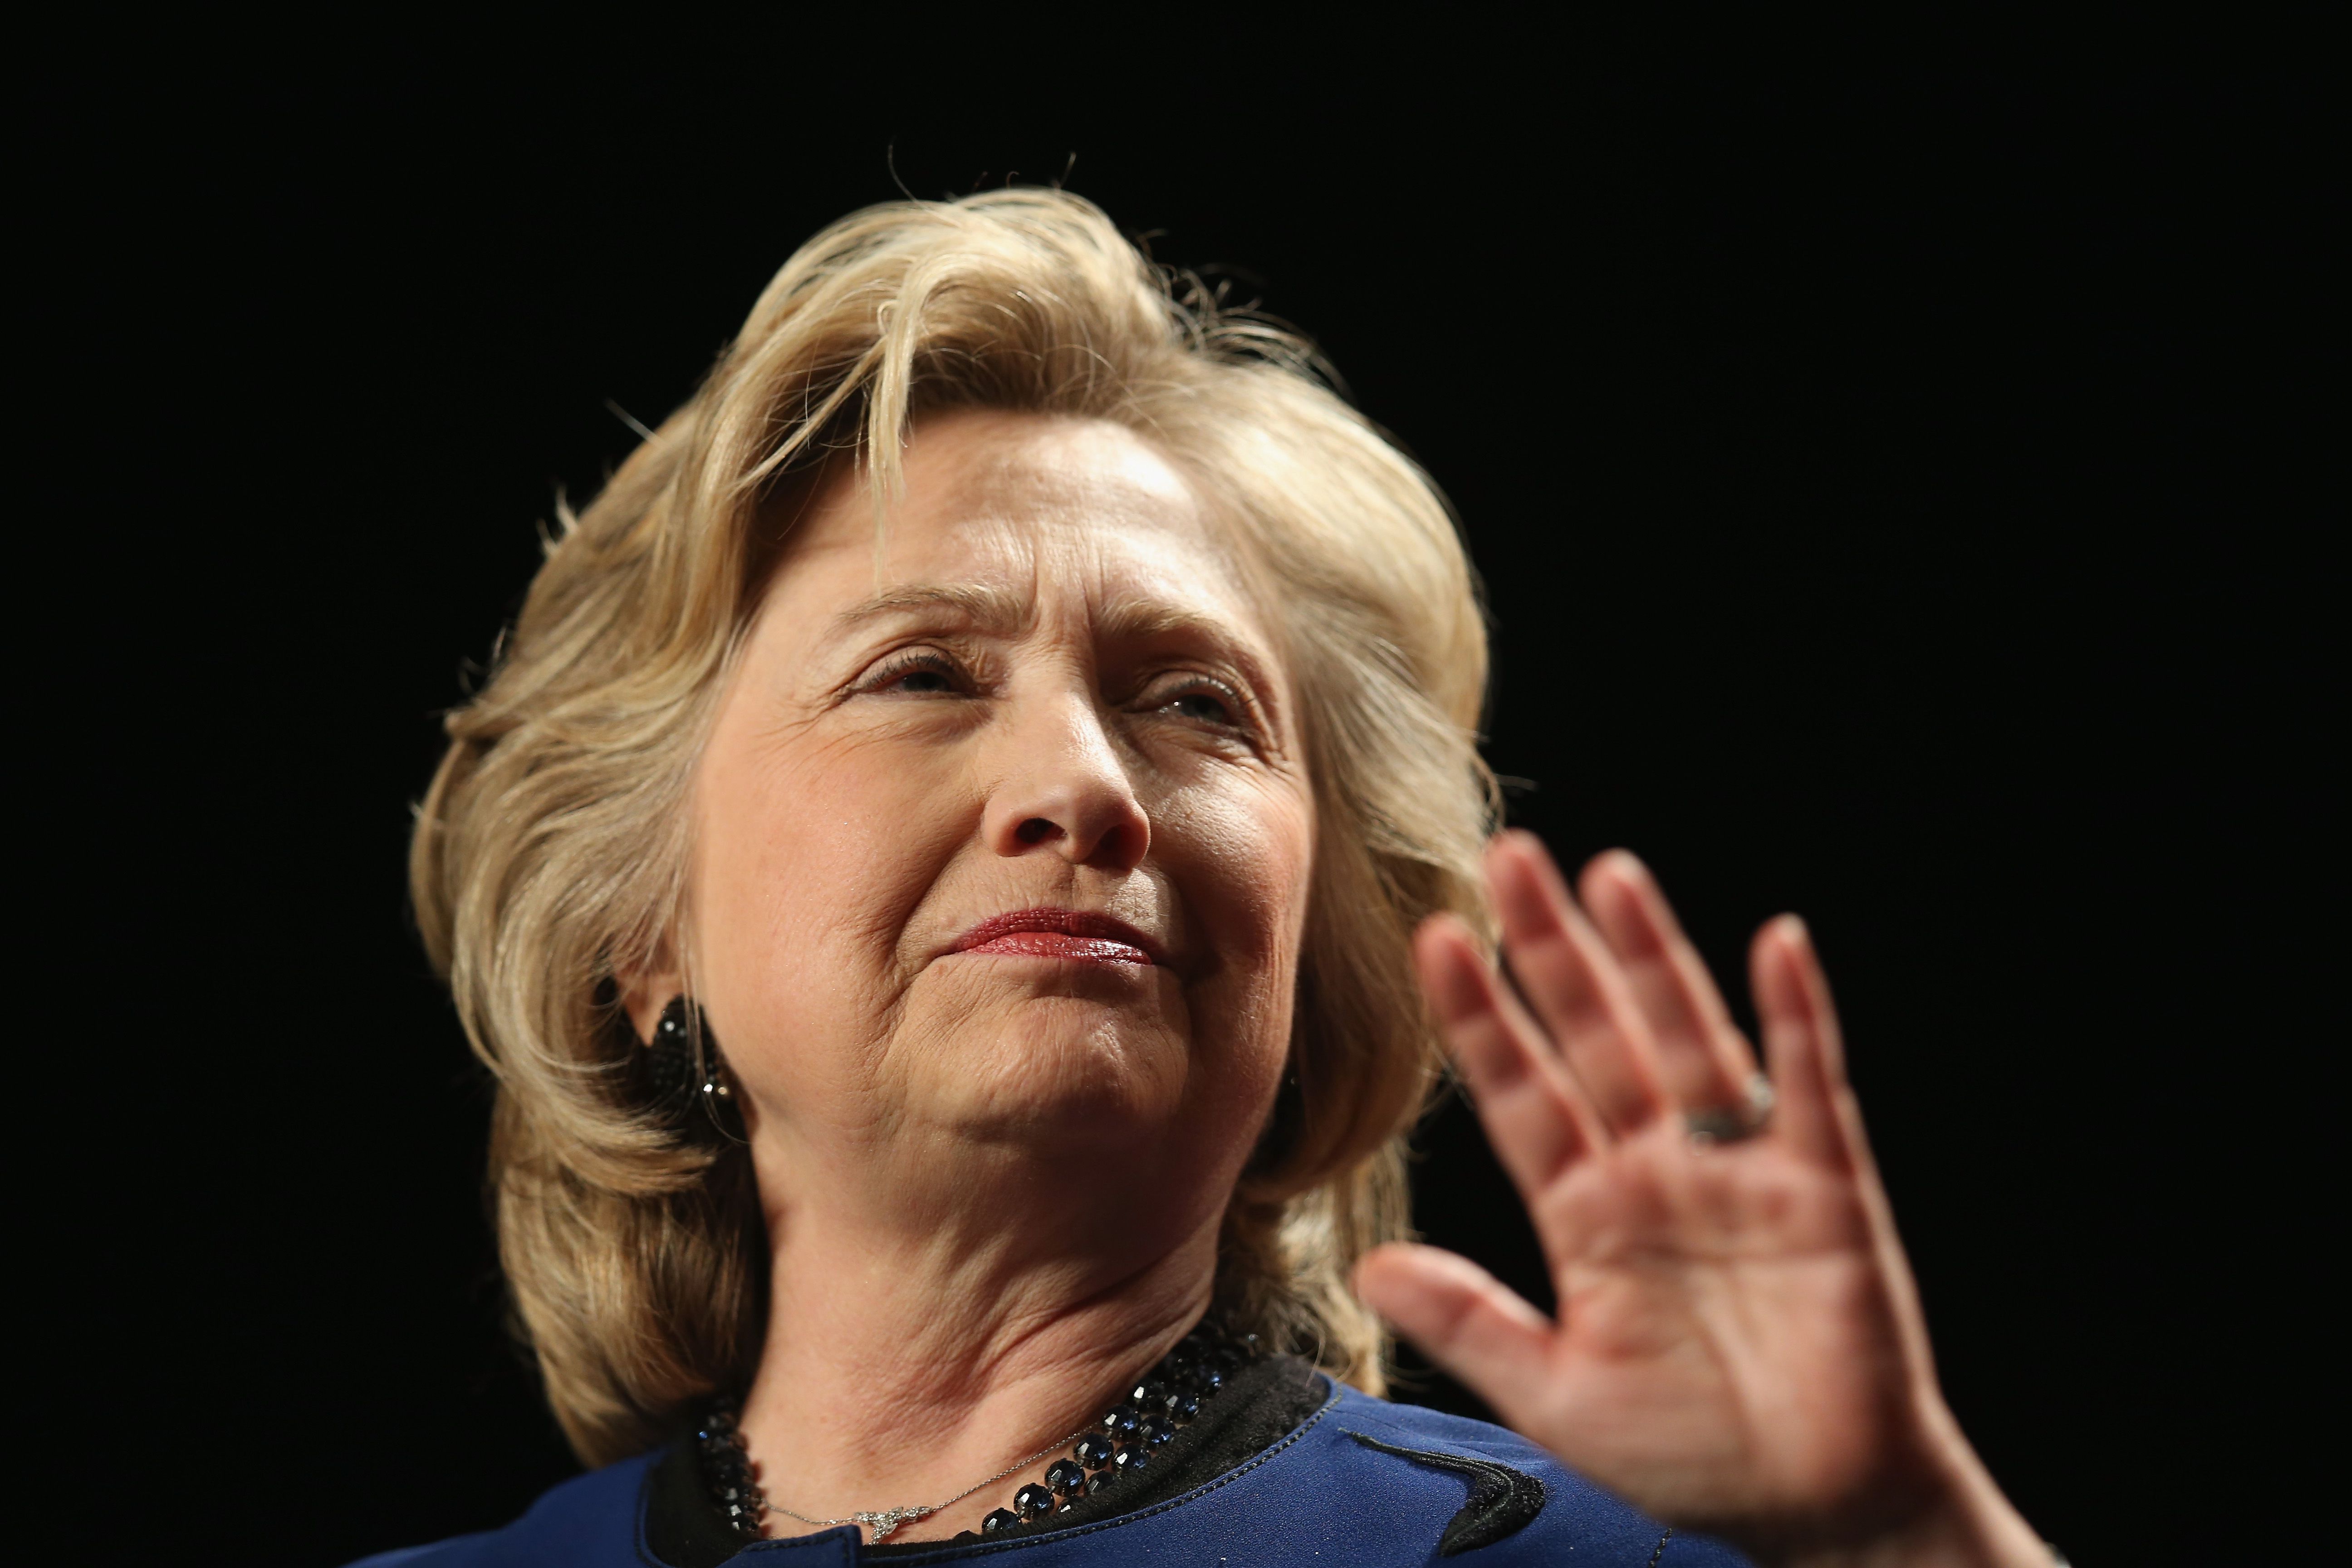 Hillary canceled her last public event because the crowd kept chanting “Lock her up!”